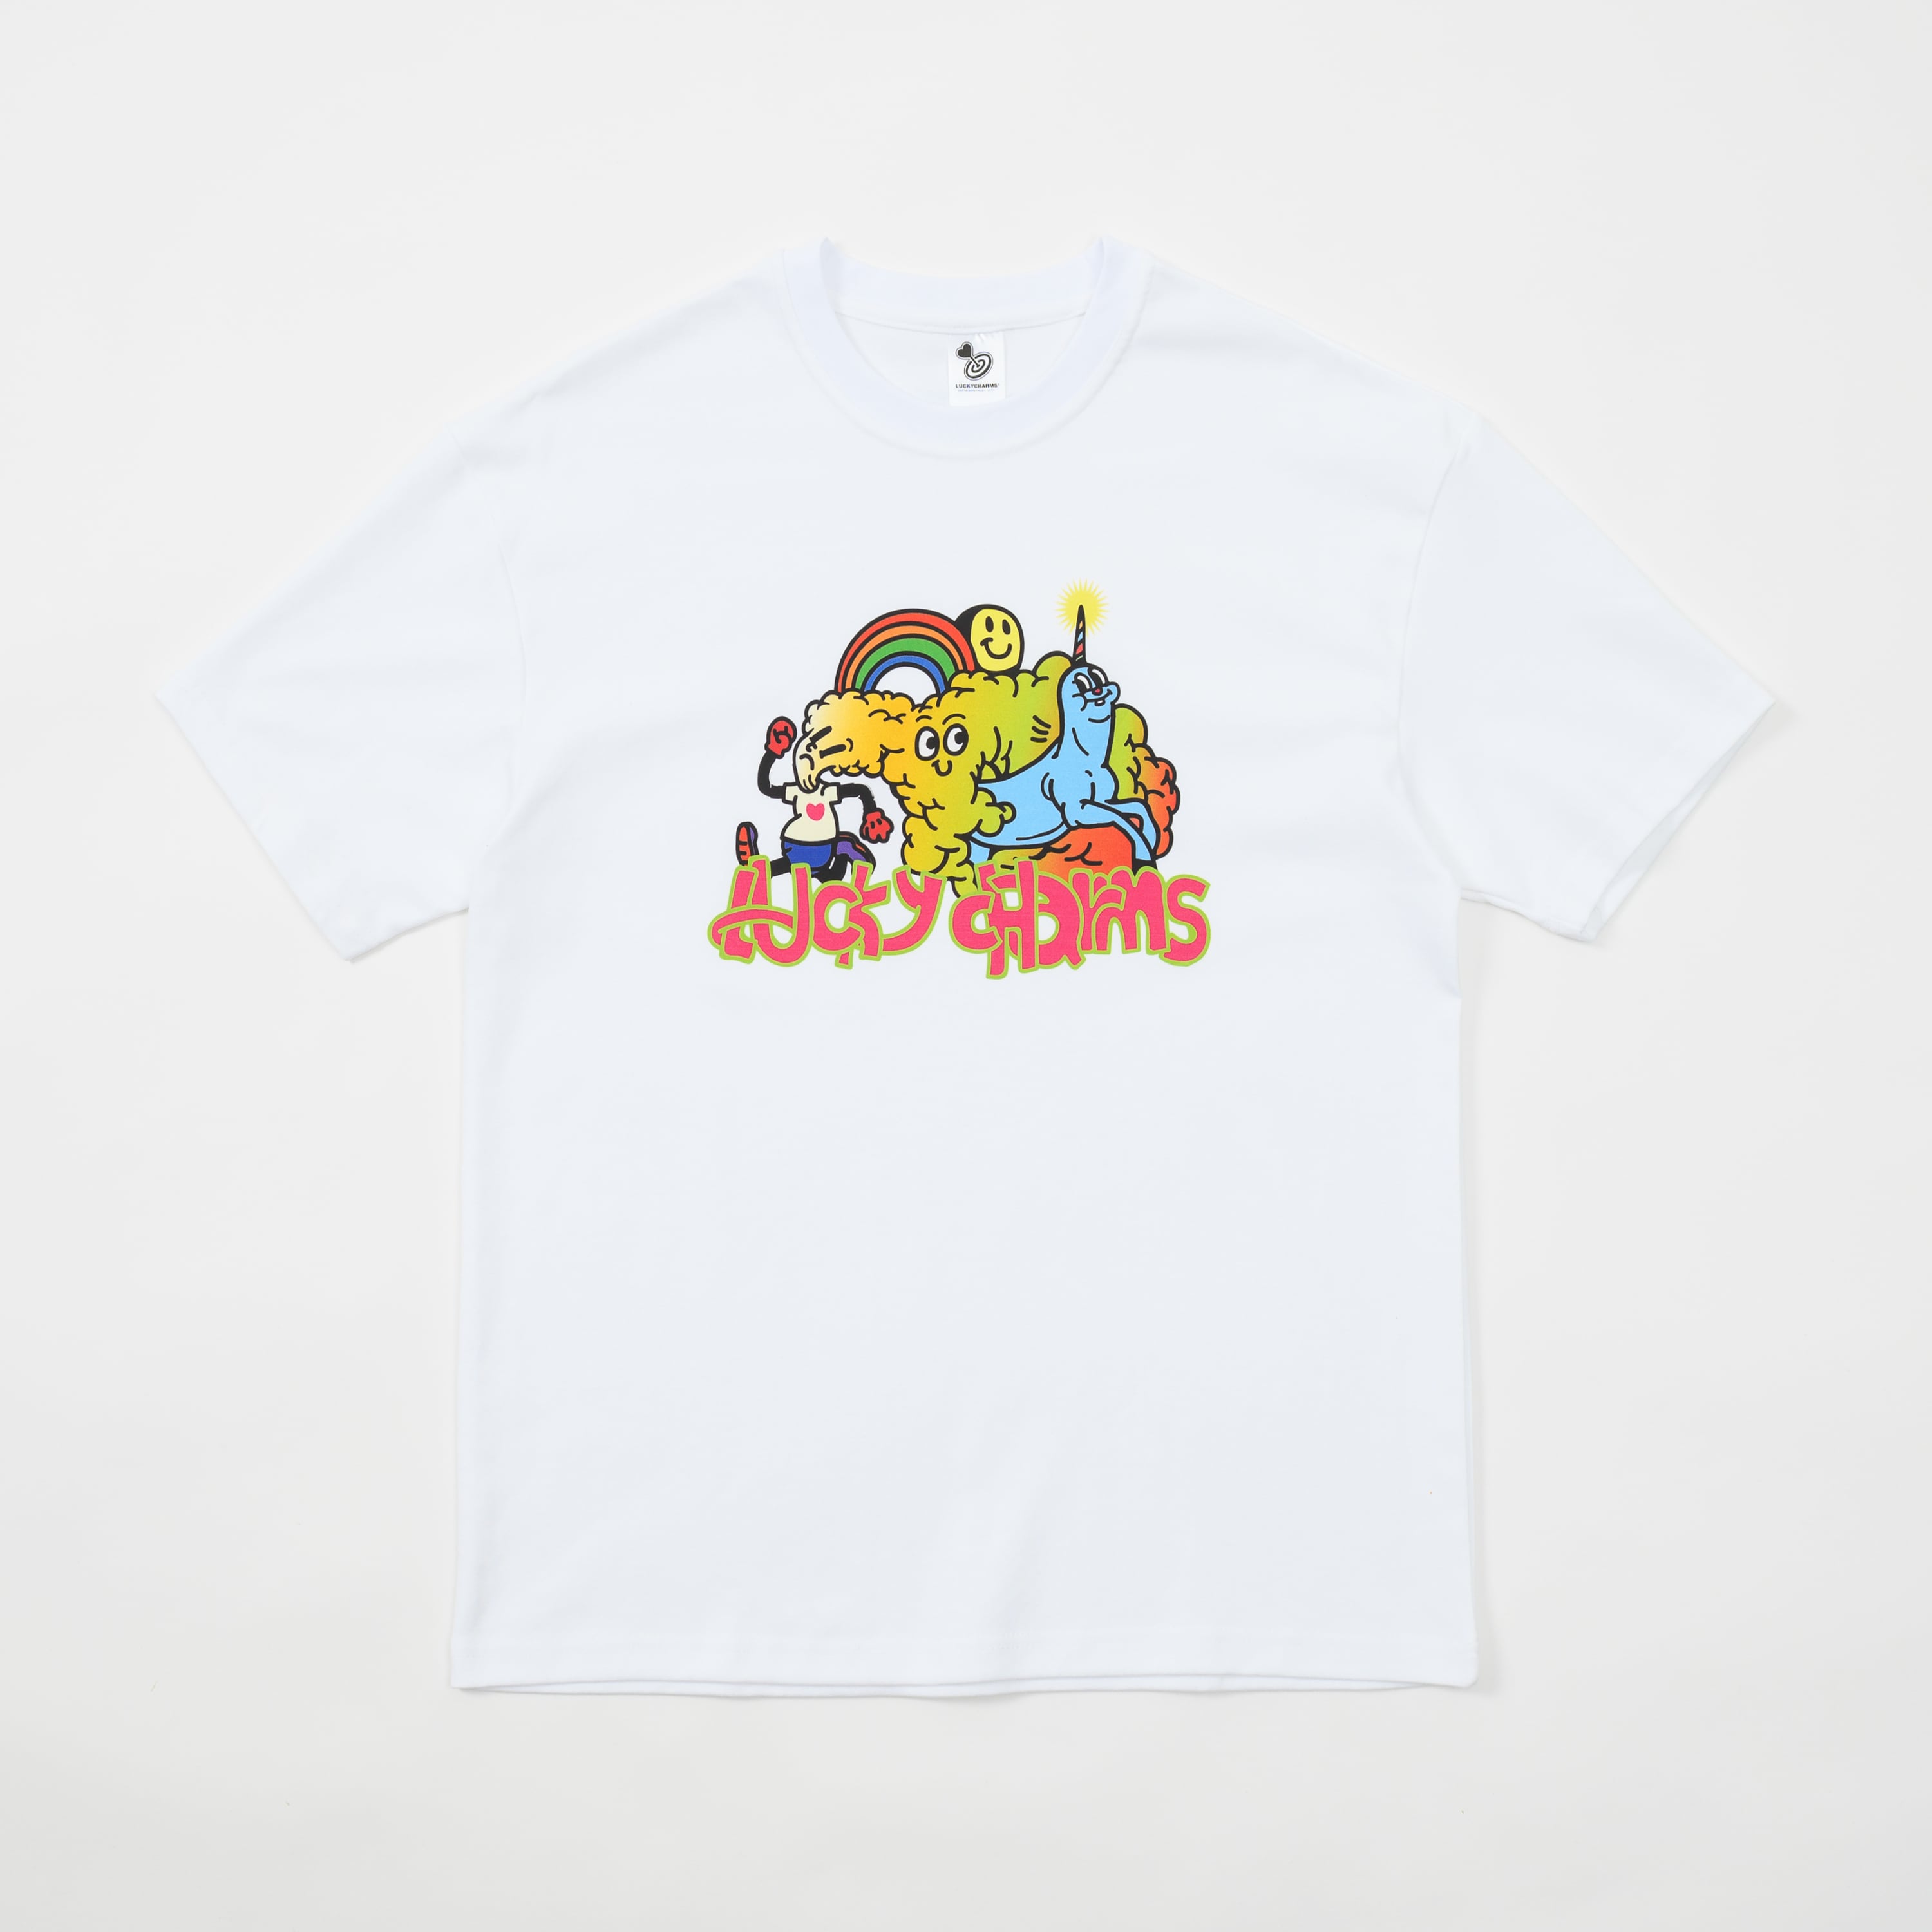 [LKCS] LUCKYCHARMS x OX. Happy day T-Shirts white 正規品 韓国ブランド 韓国ファッション 韓国代行  lucky charms T-シャツ ソ・イングク | BONZ (韓国ブランド 代行) powered by BASE